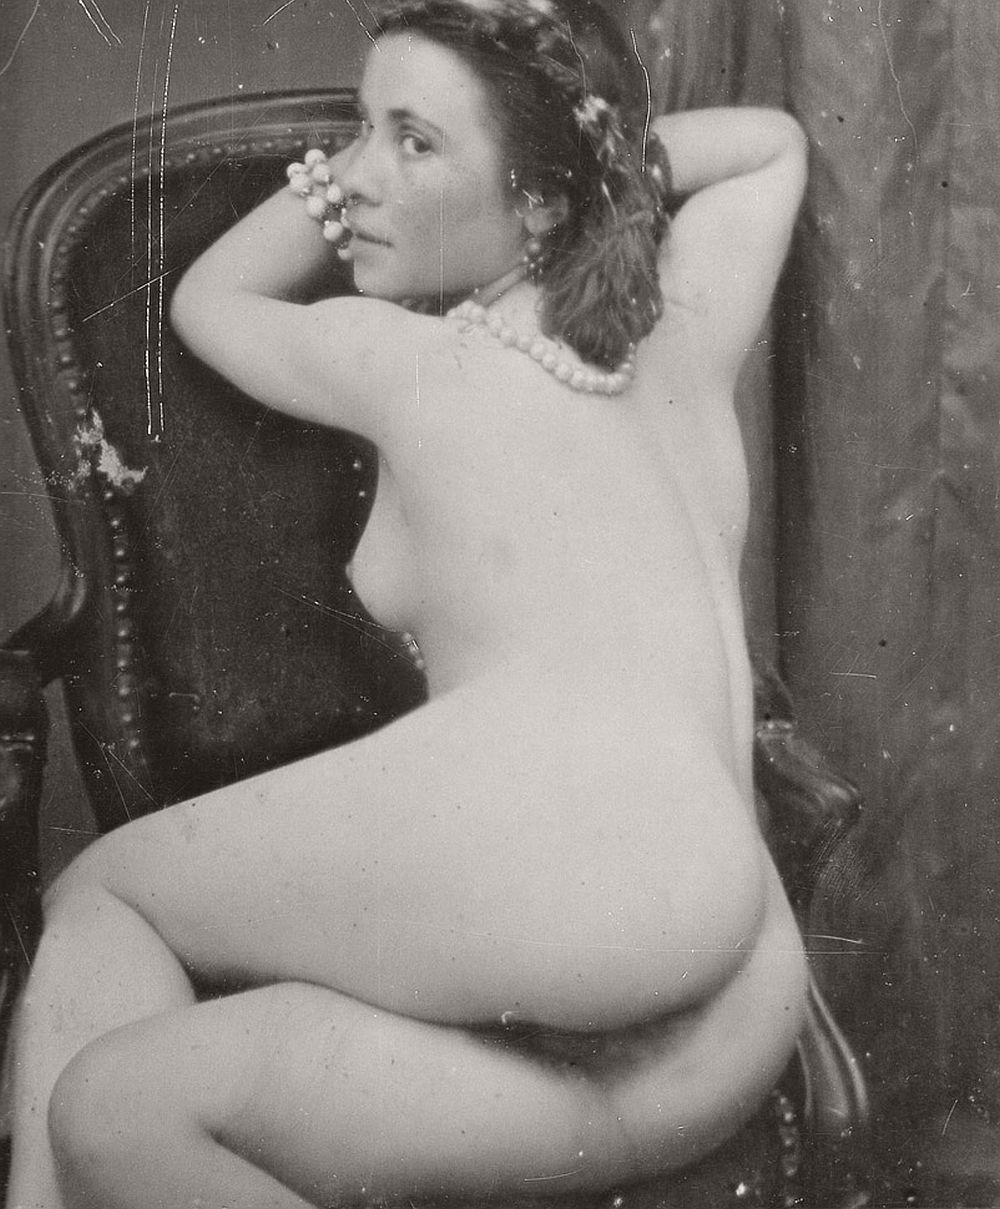 Photo collection of 1920s French postcards of nude women and vintage erotic...